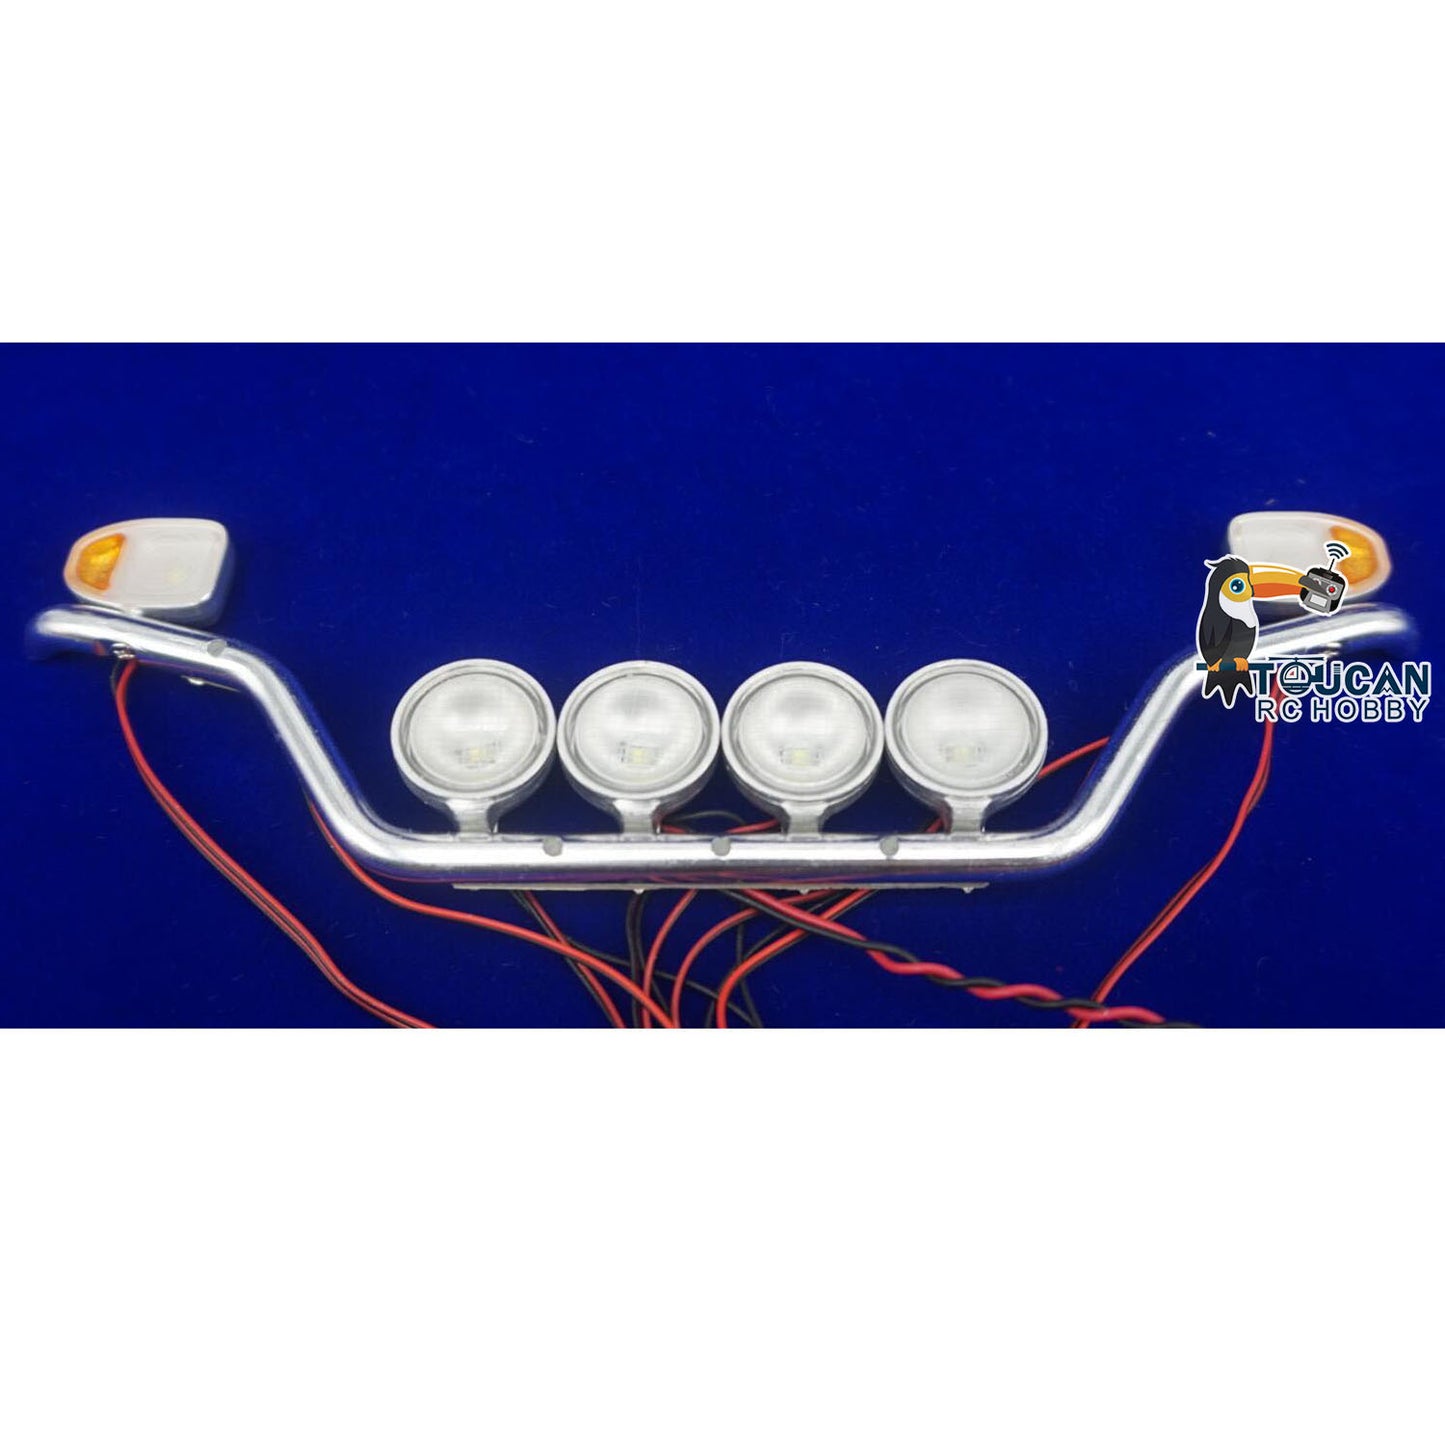 Aluminium Bar Light with 4 Round LED Lamp for 1/14 RC Tractor Truck 770S 56371 56323 Cars Radio Controlled TractorModel